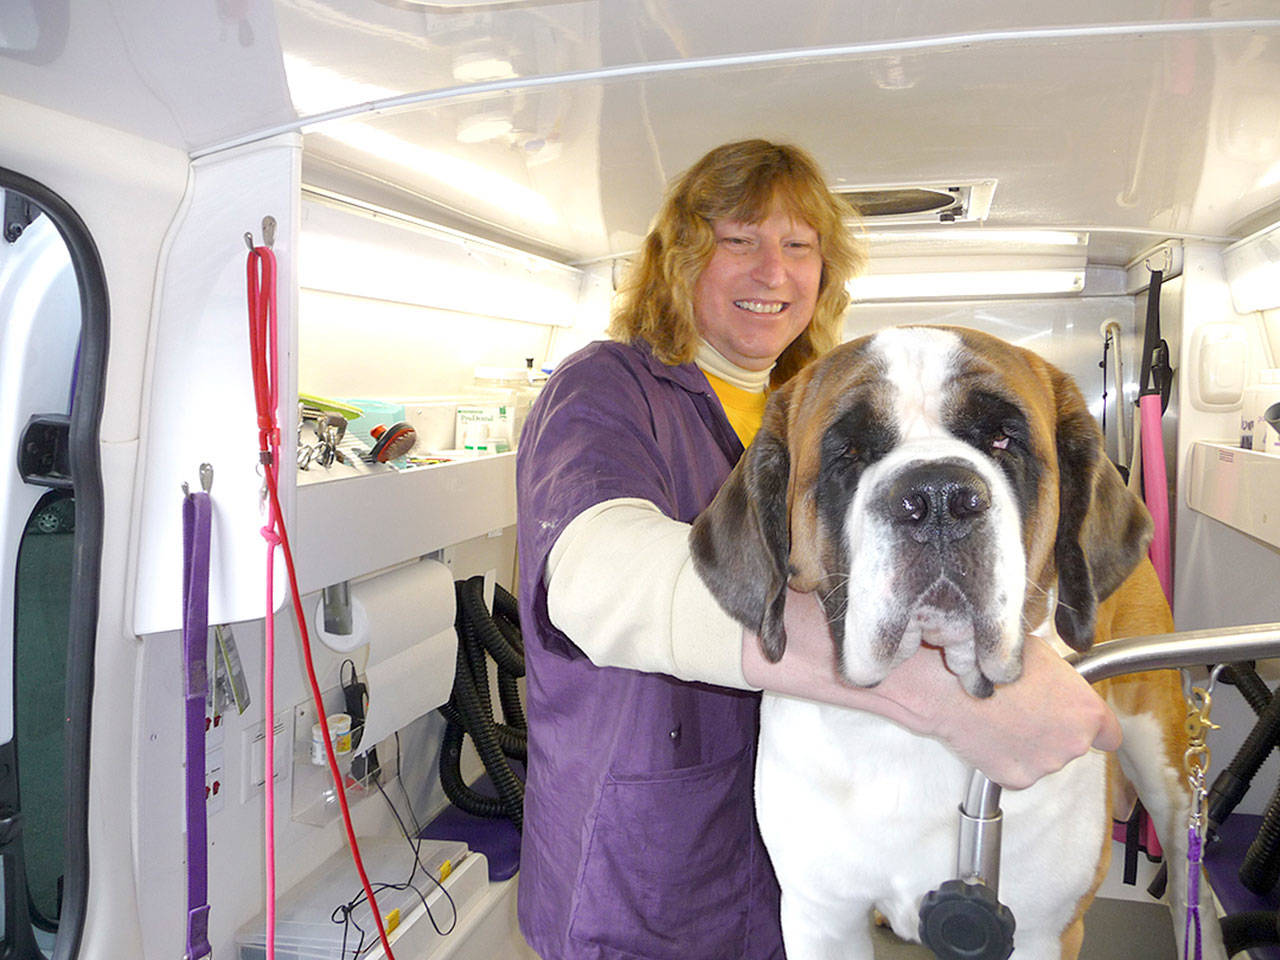 Deena and her human, Wilhelm Beckmann, demonstrate there’s plenty of room in the grooming van for plus-size dogs.